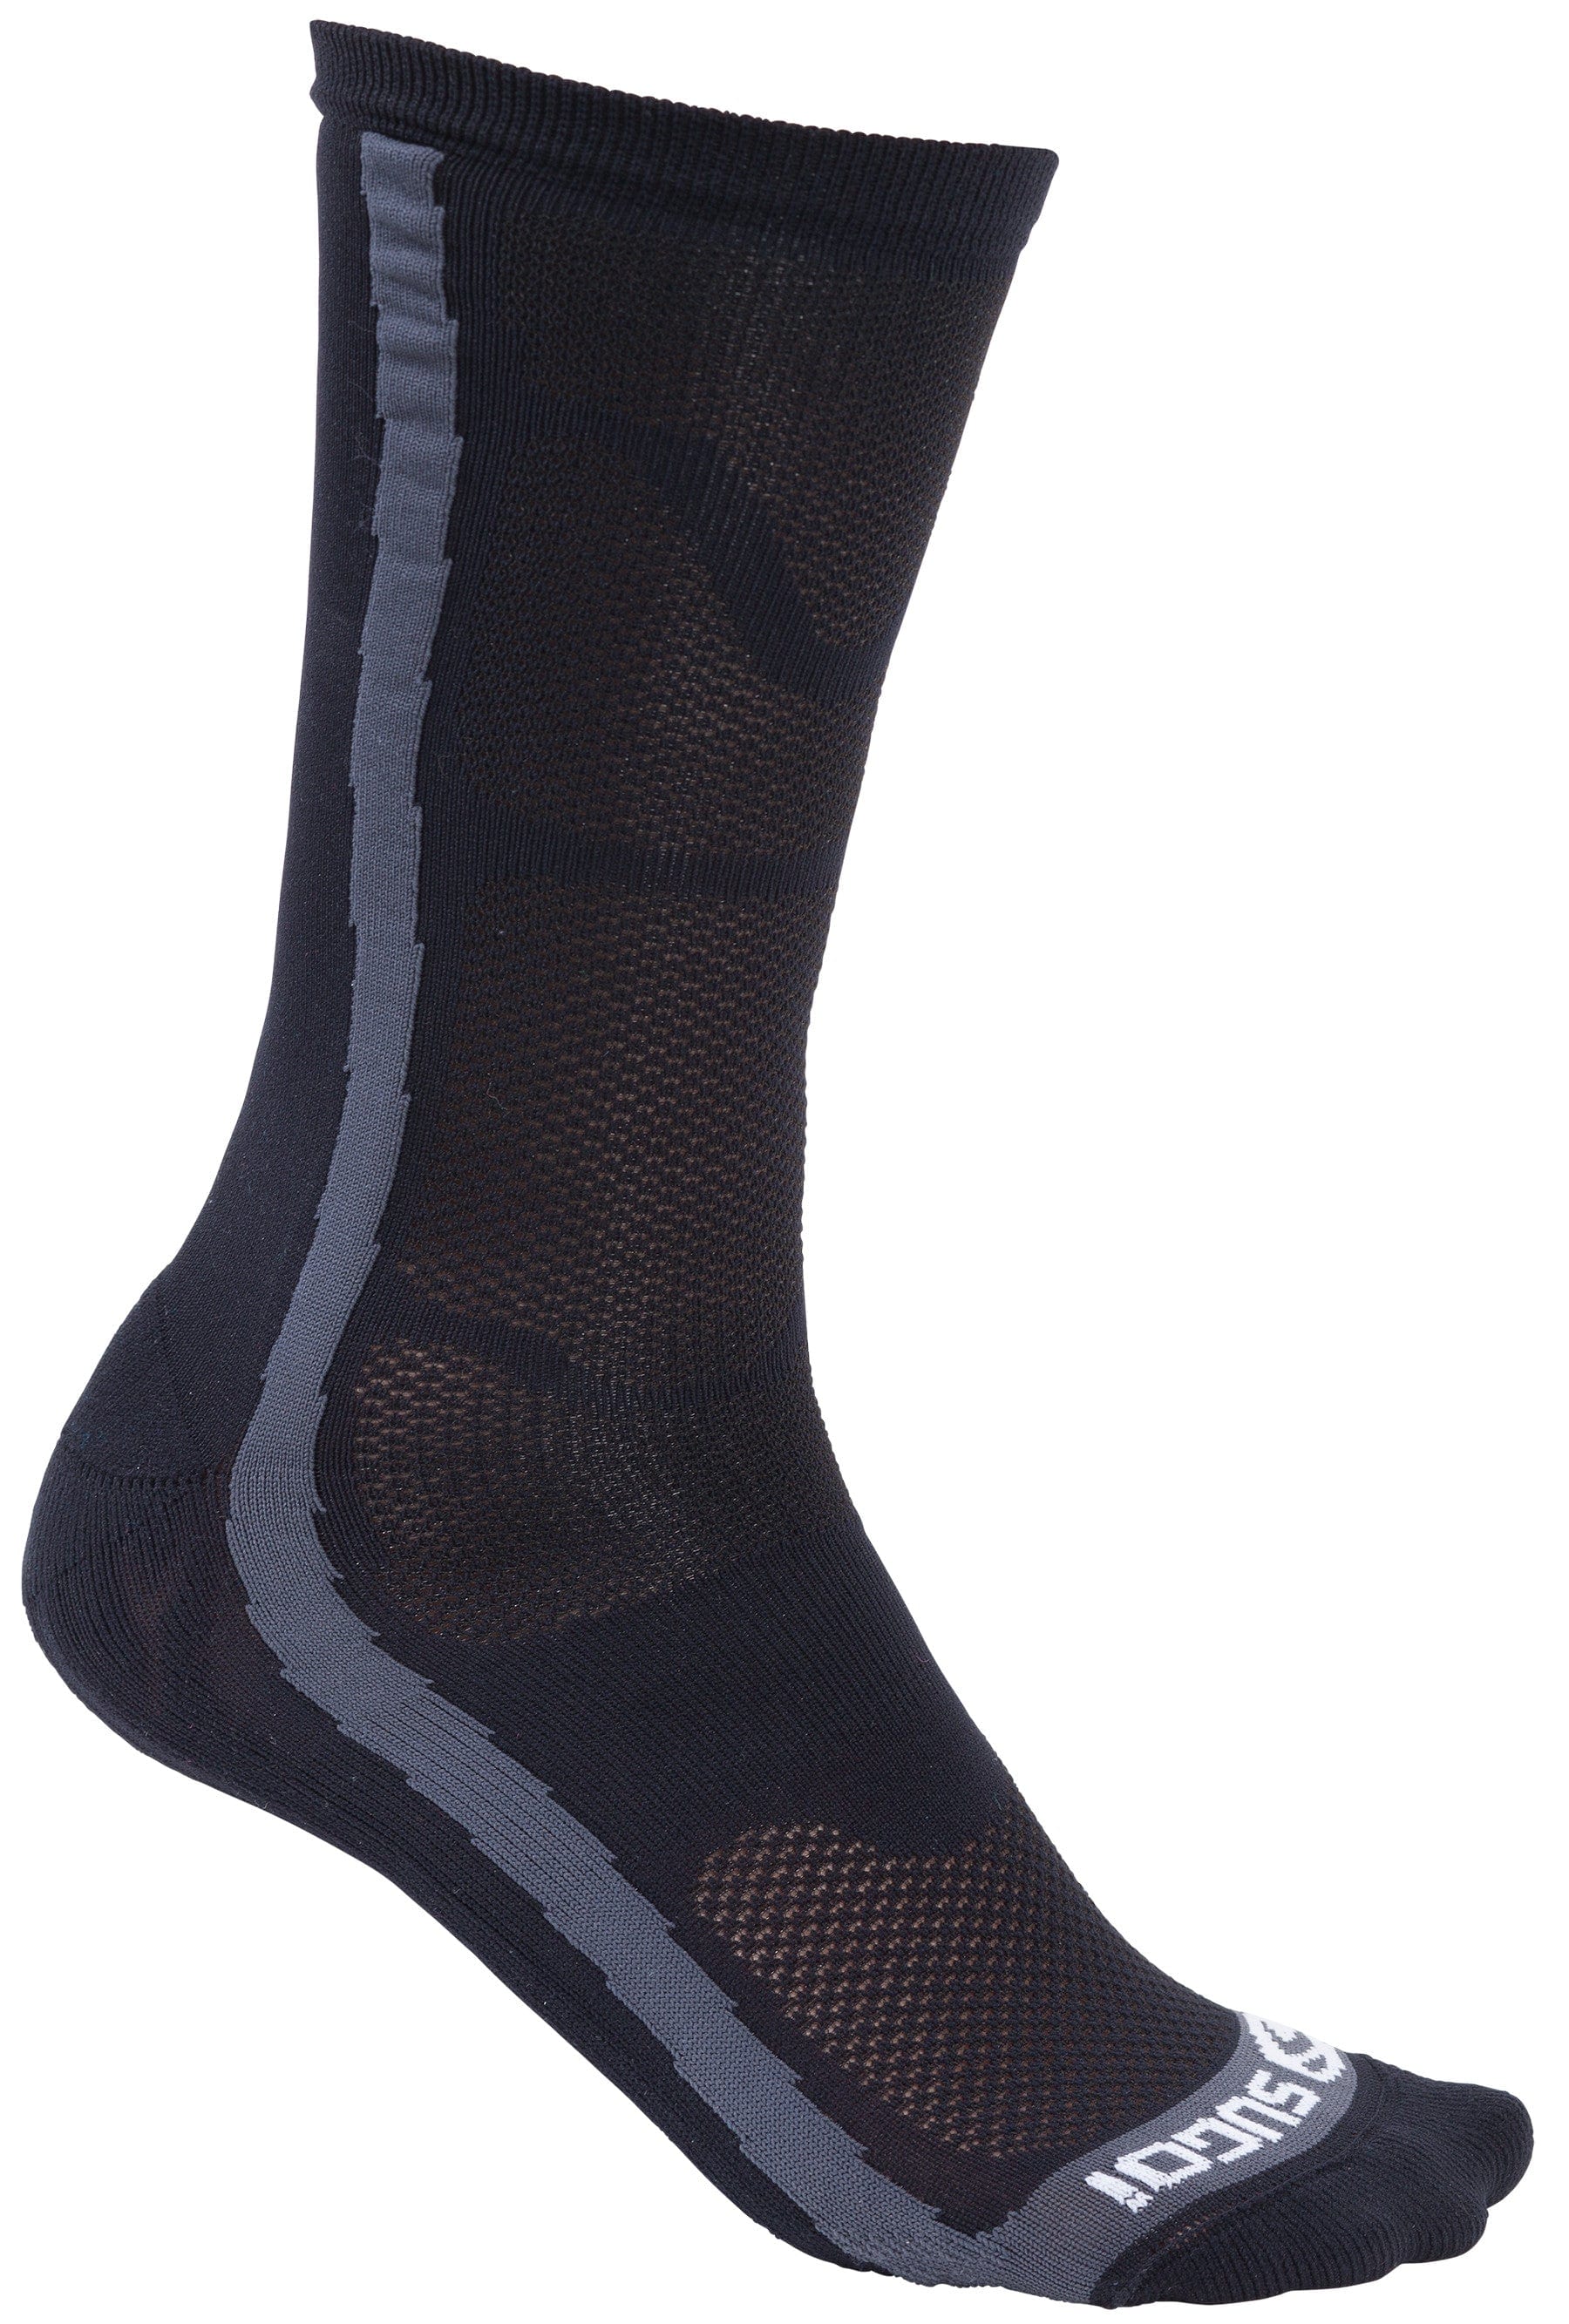 Cycle Tribe Product Sizes Black / L Sugoi RS Crew Cycling Socks